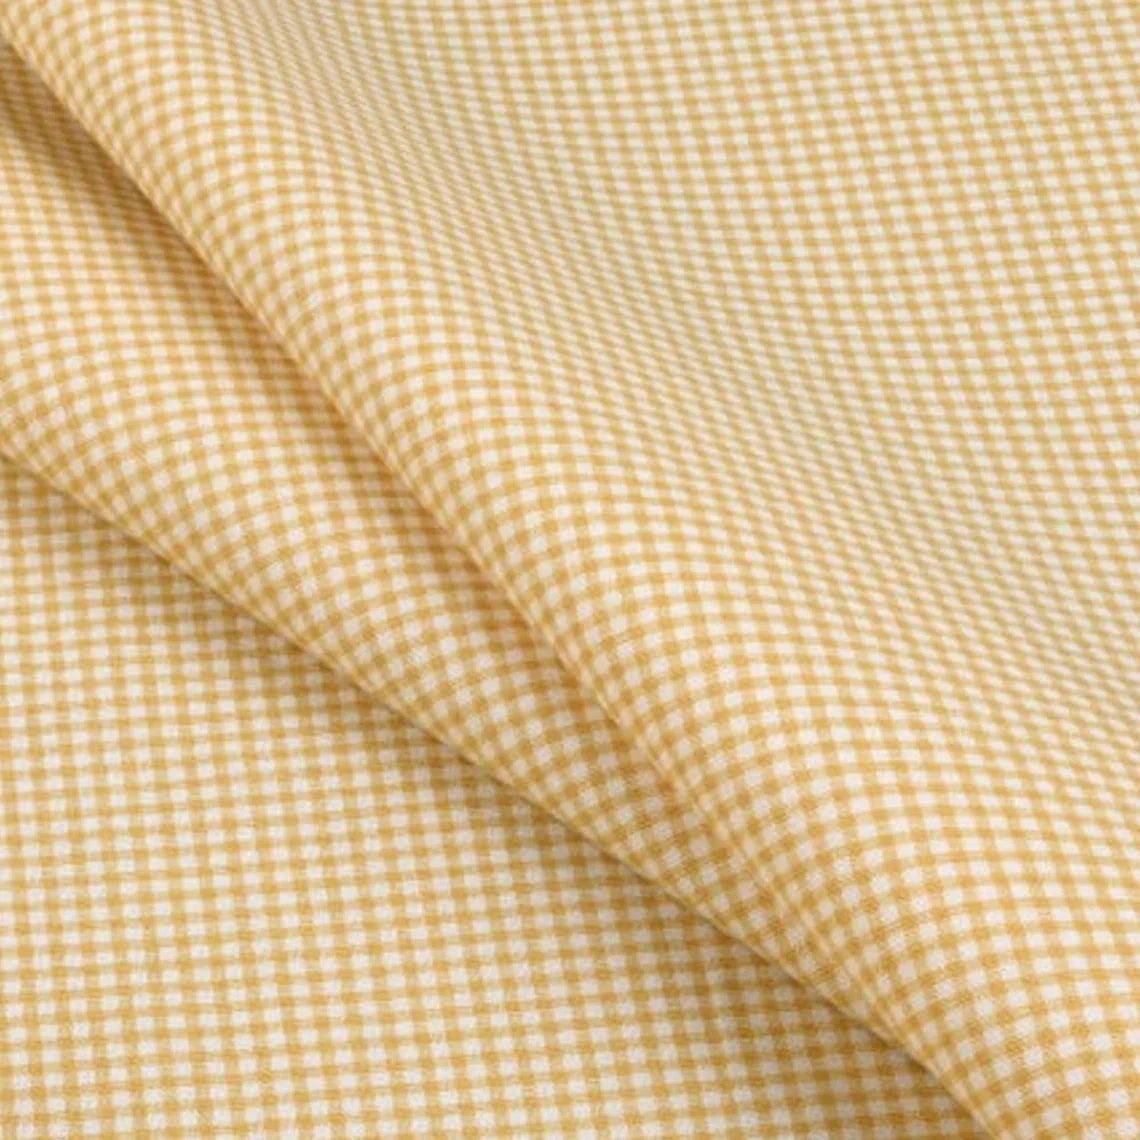 Tailored Valance in Farmhouse Barley Yellow Gold Gingham Check